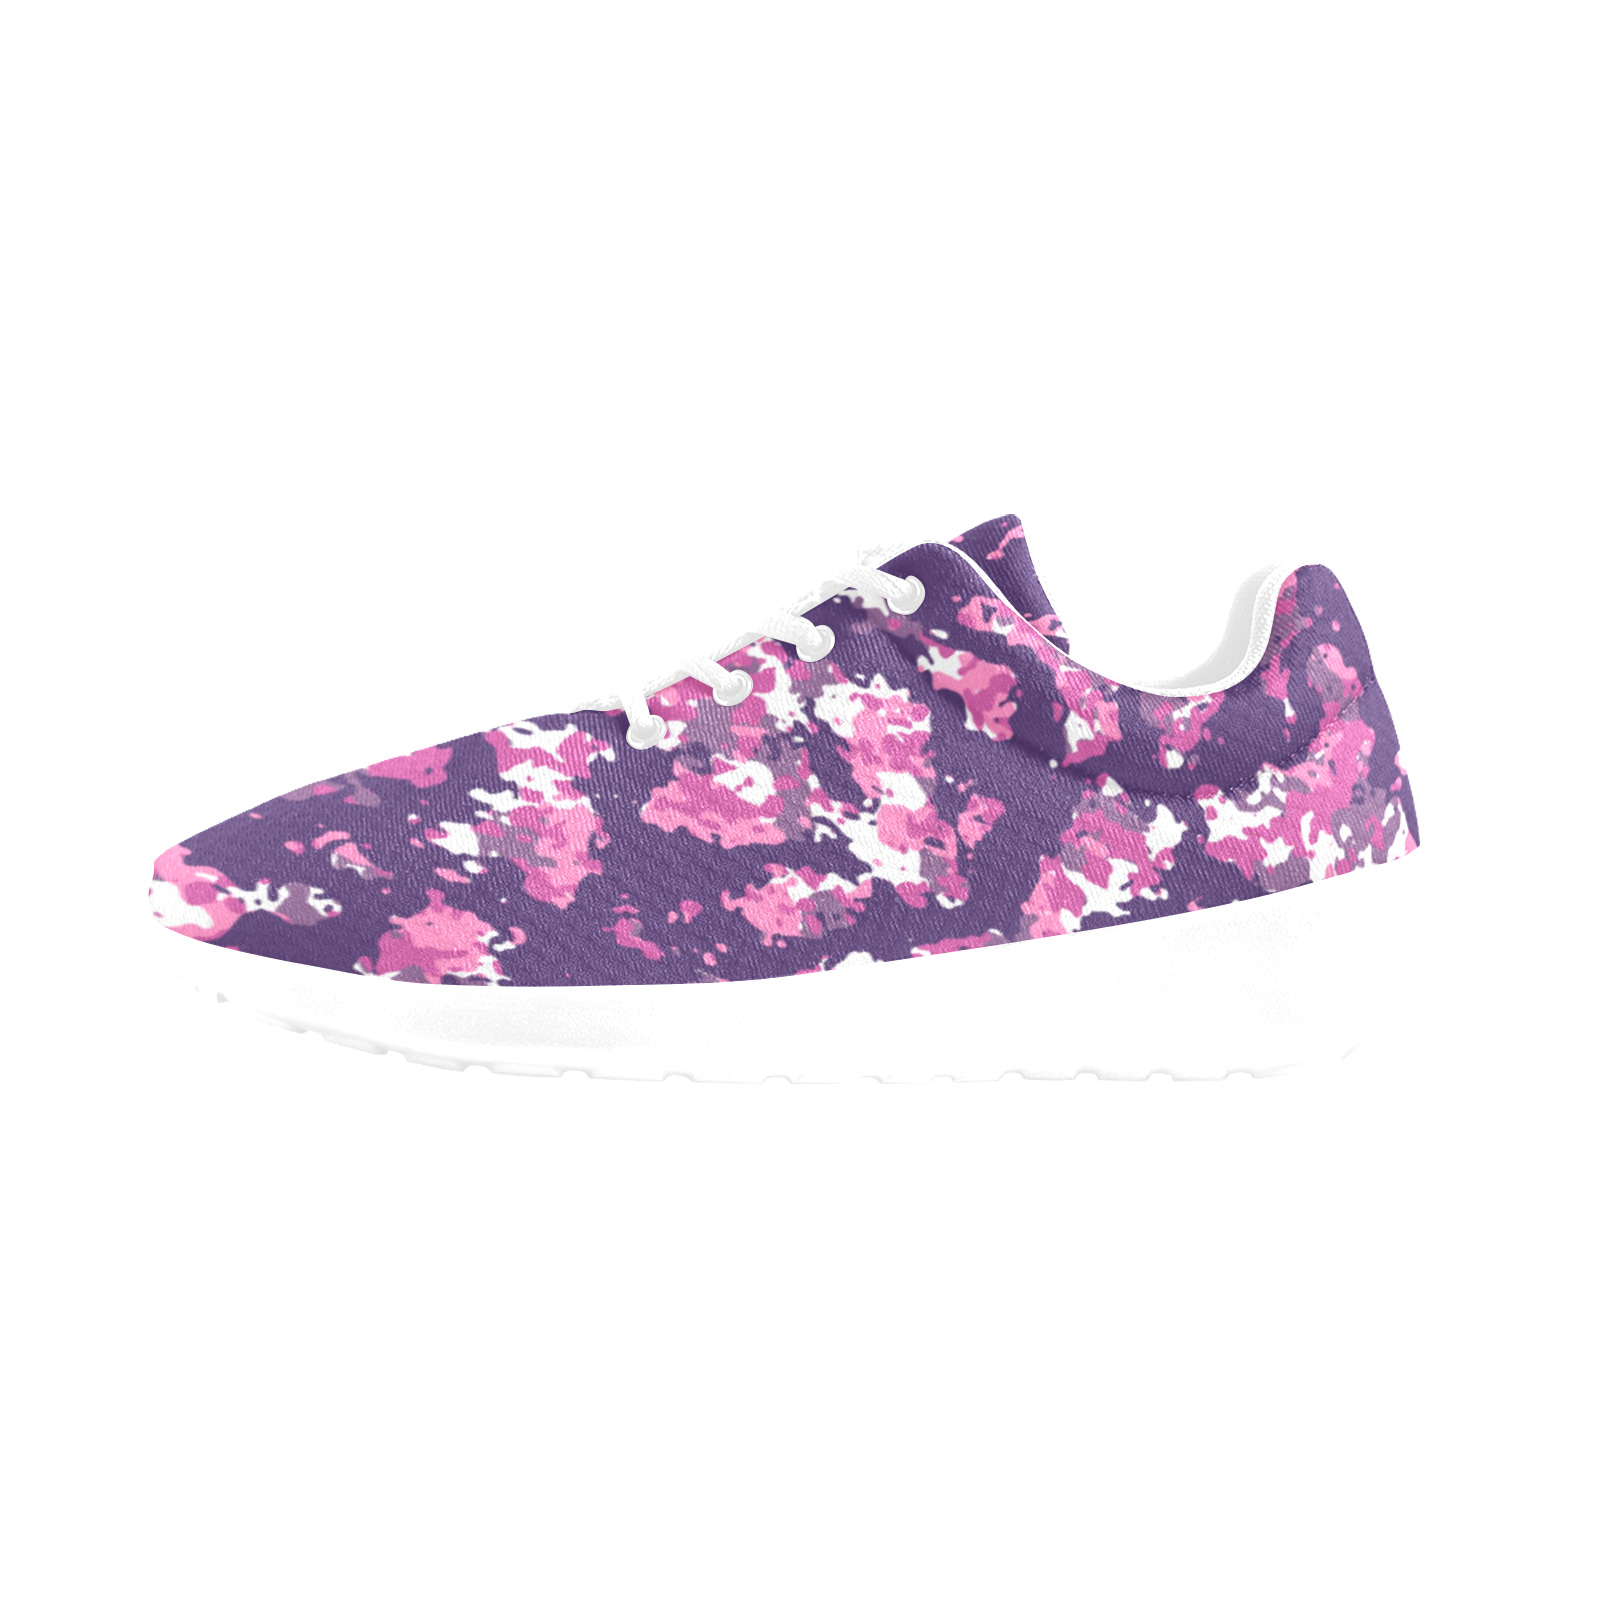 Deep Forest Fashion Streetwear Camouflage Women's Athletic Shoes (Model 0200)